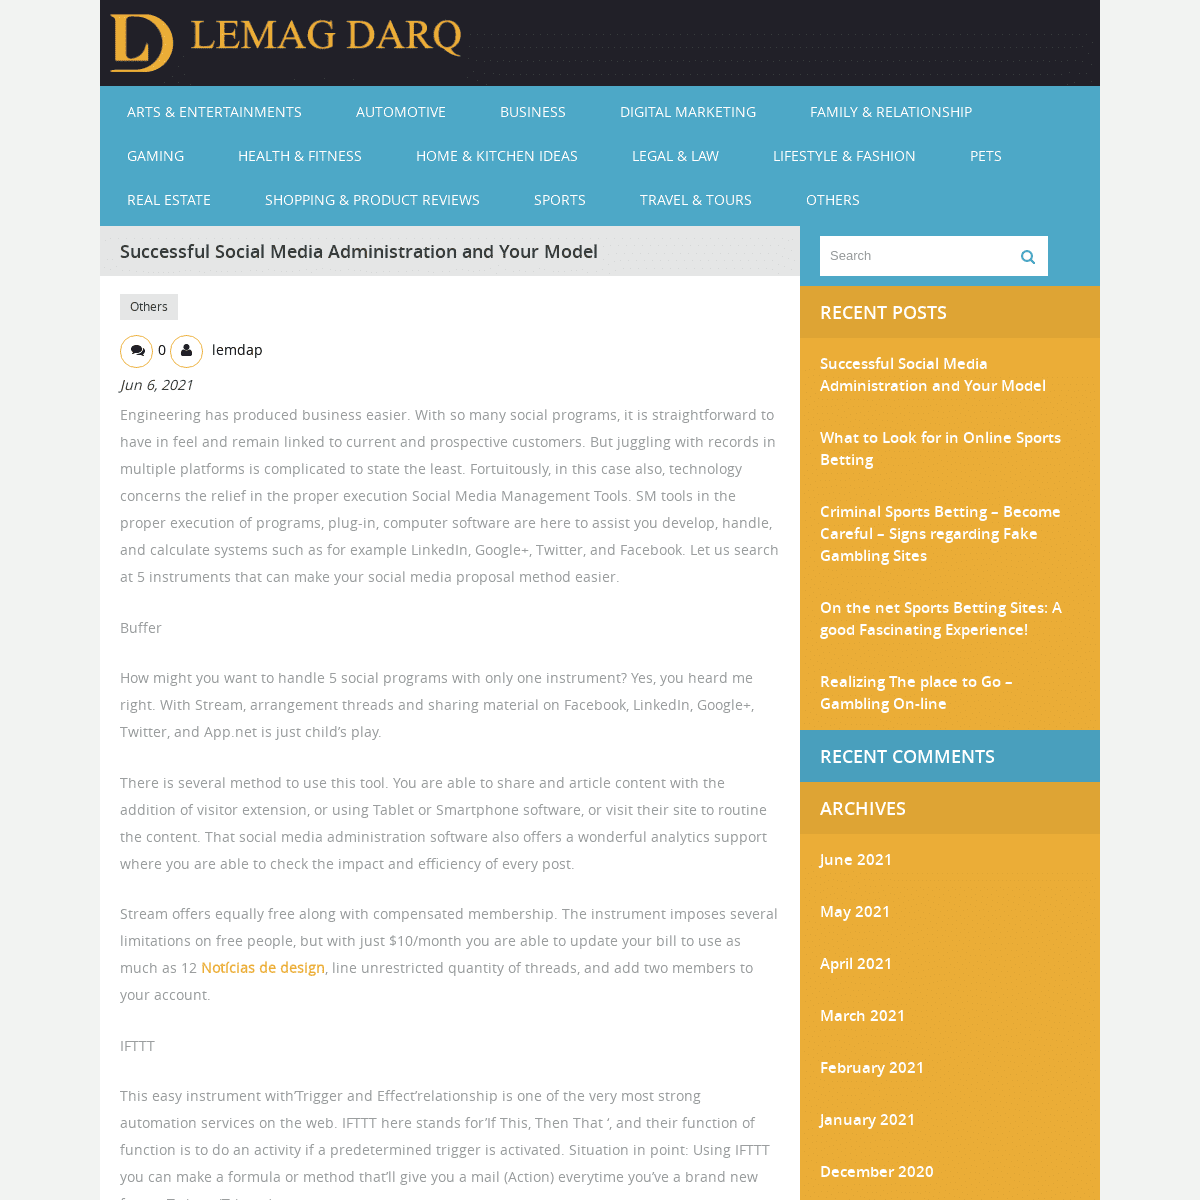 A complete backup of https://lemagdarqroom.com